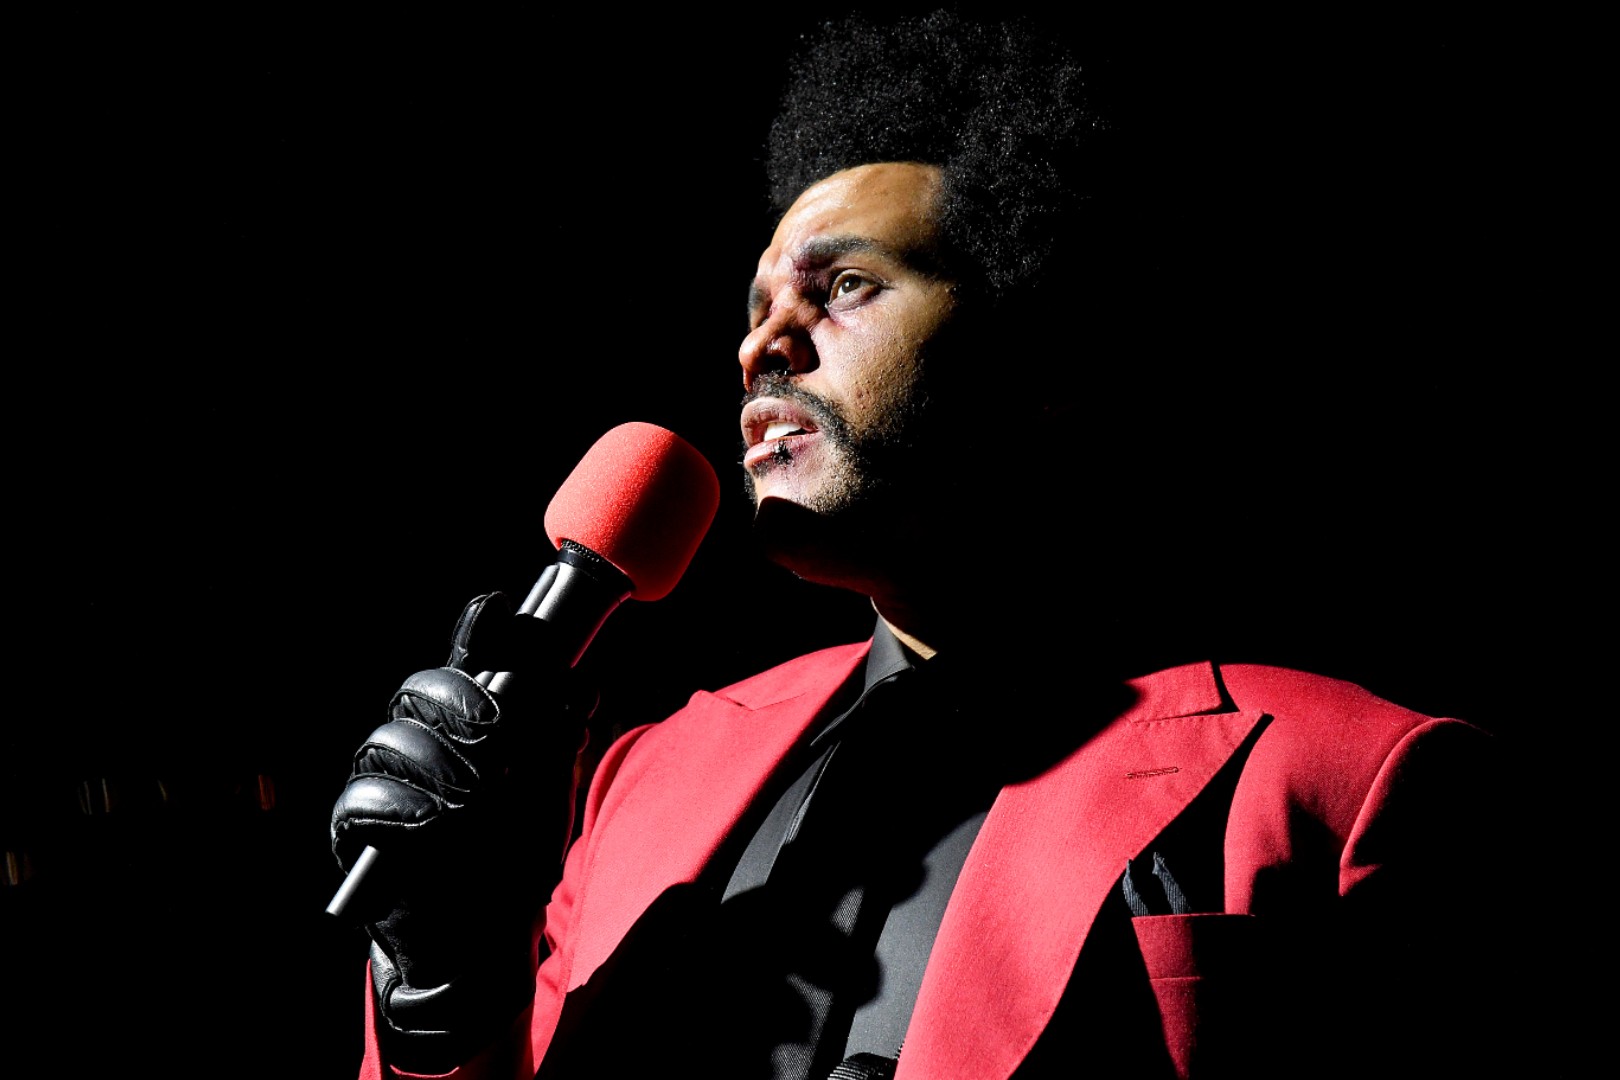 The Weeknd's Red Givenchy Suit at Super Bowl Halftime Show